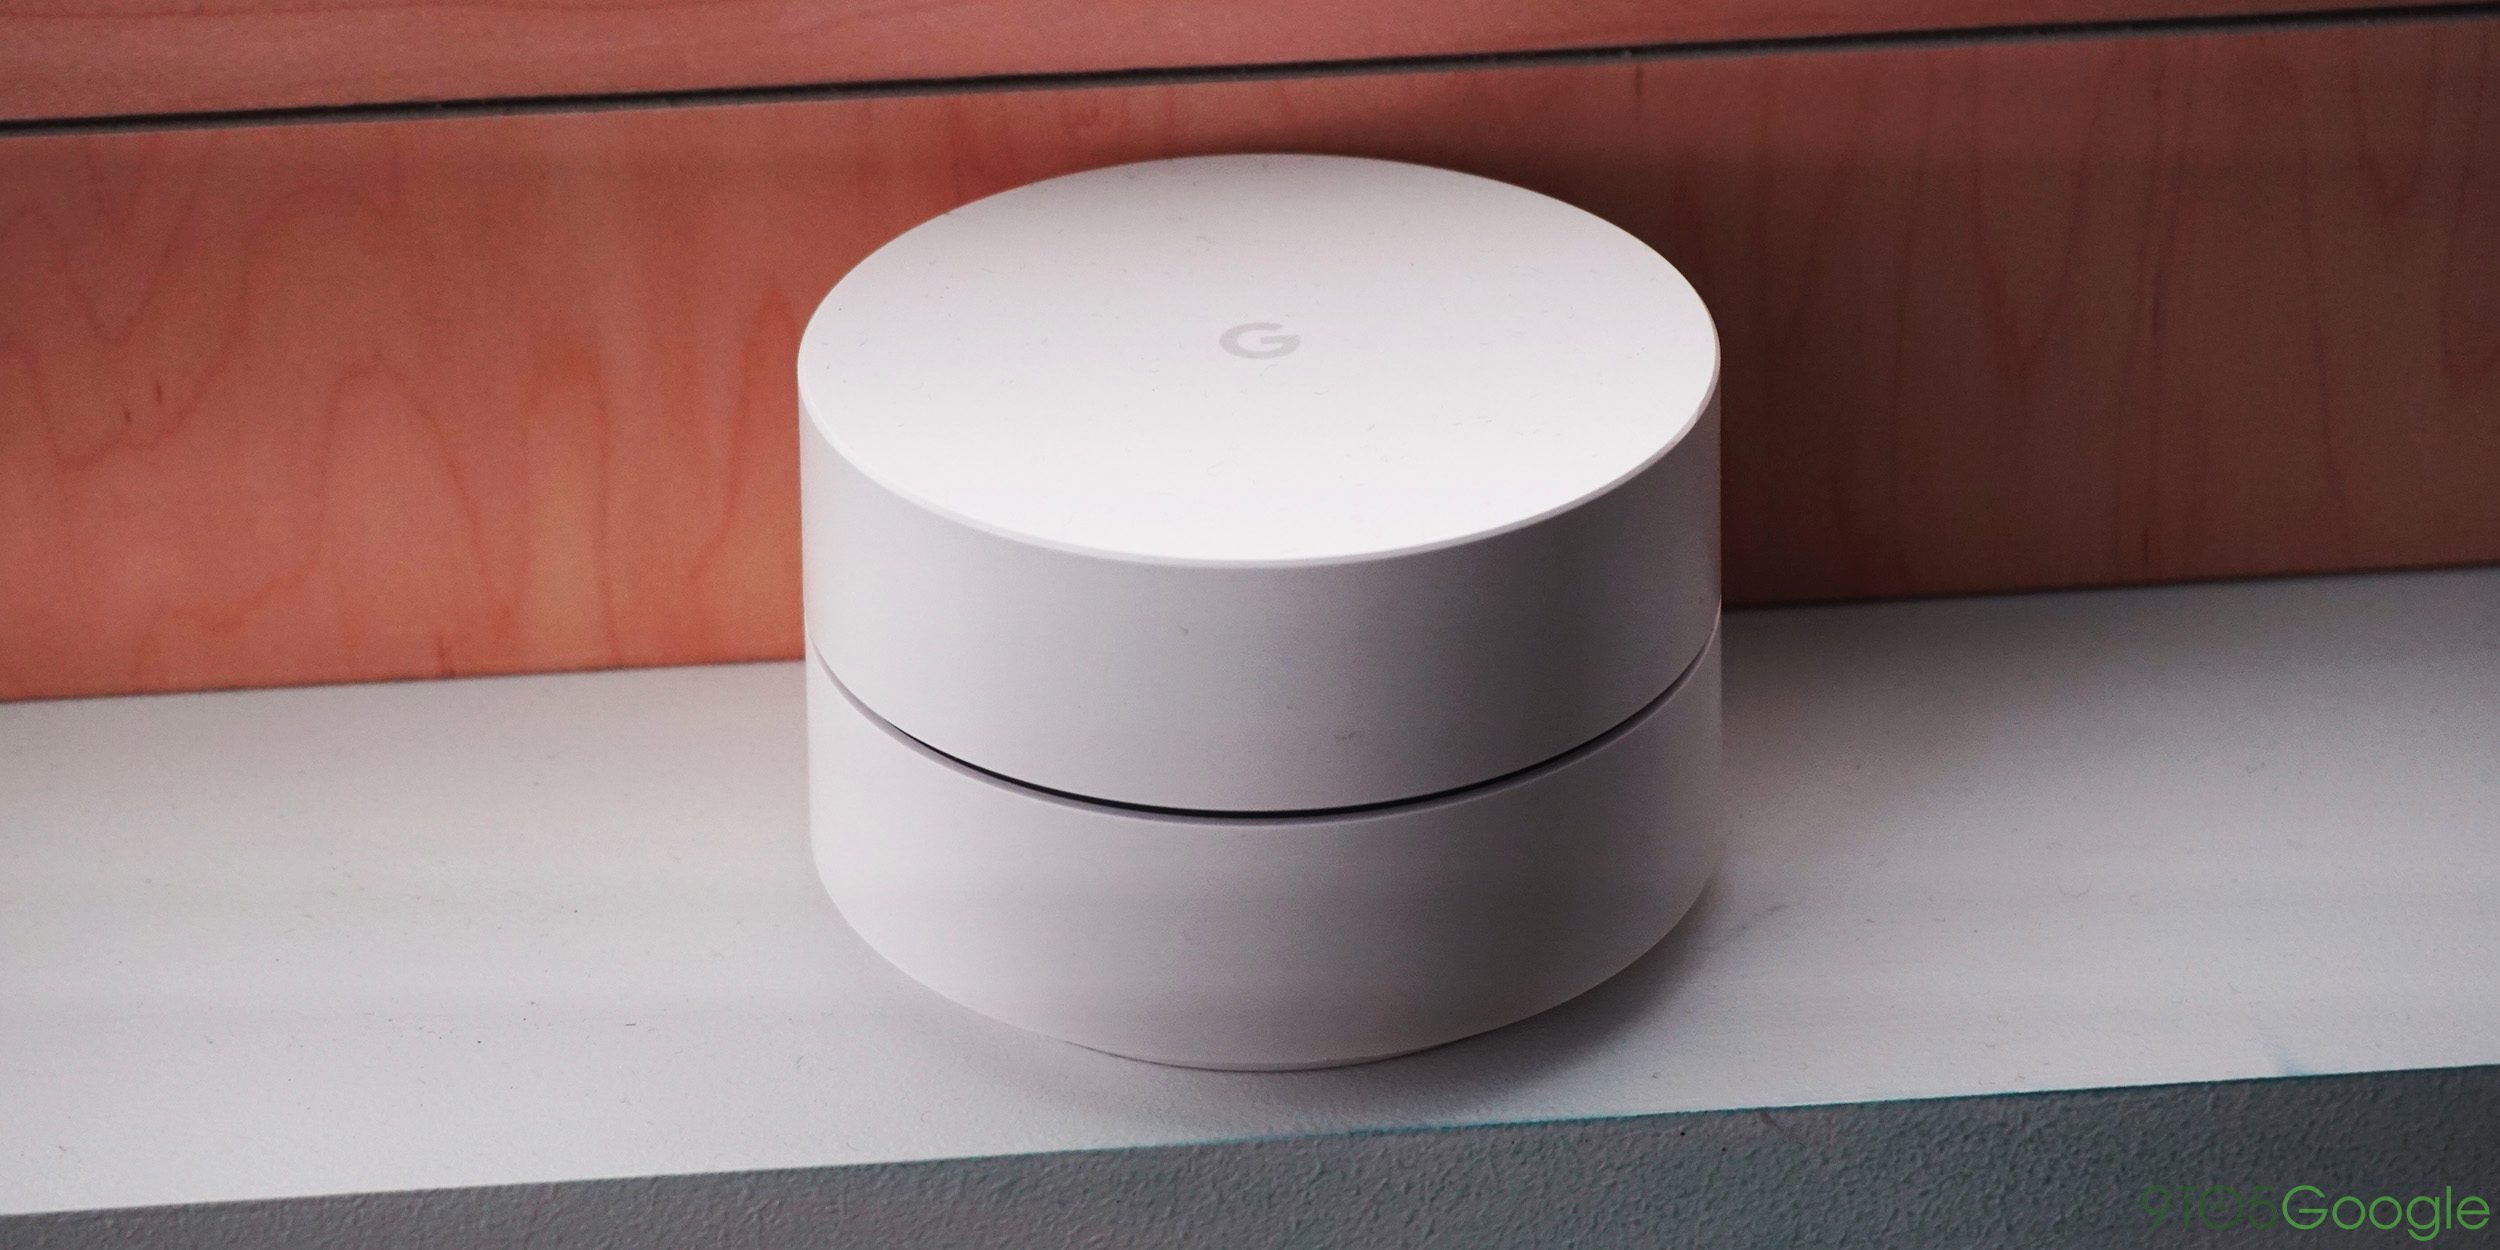 Google Property application now allows you import Google Wifi networks